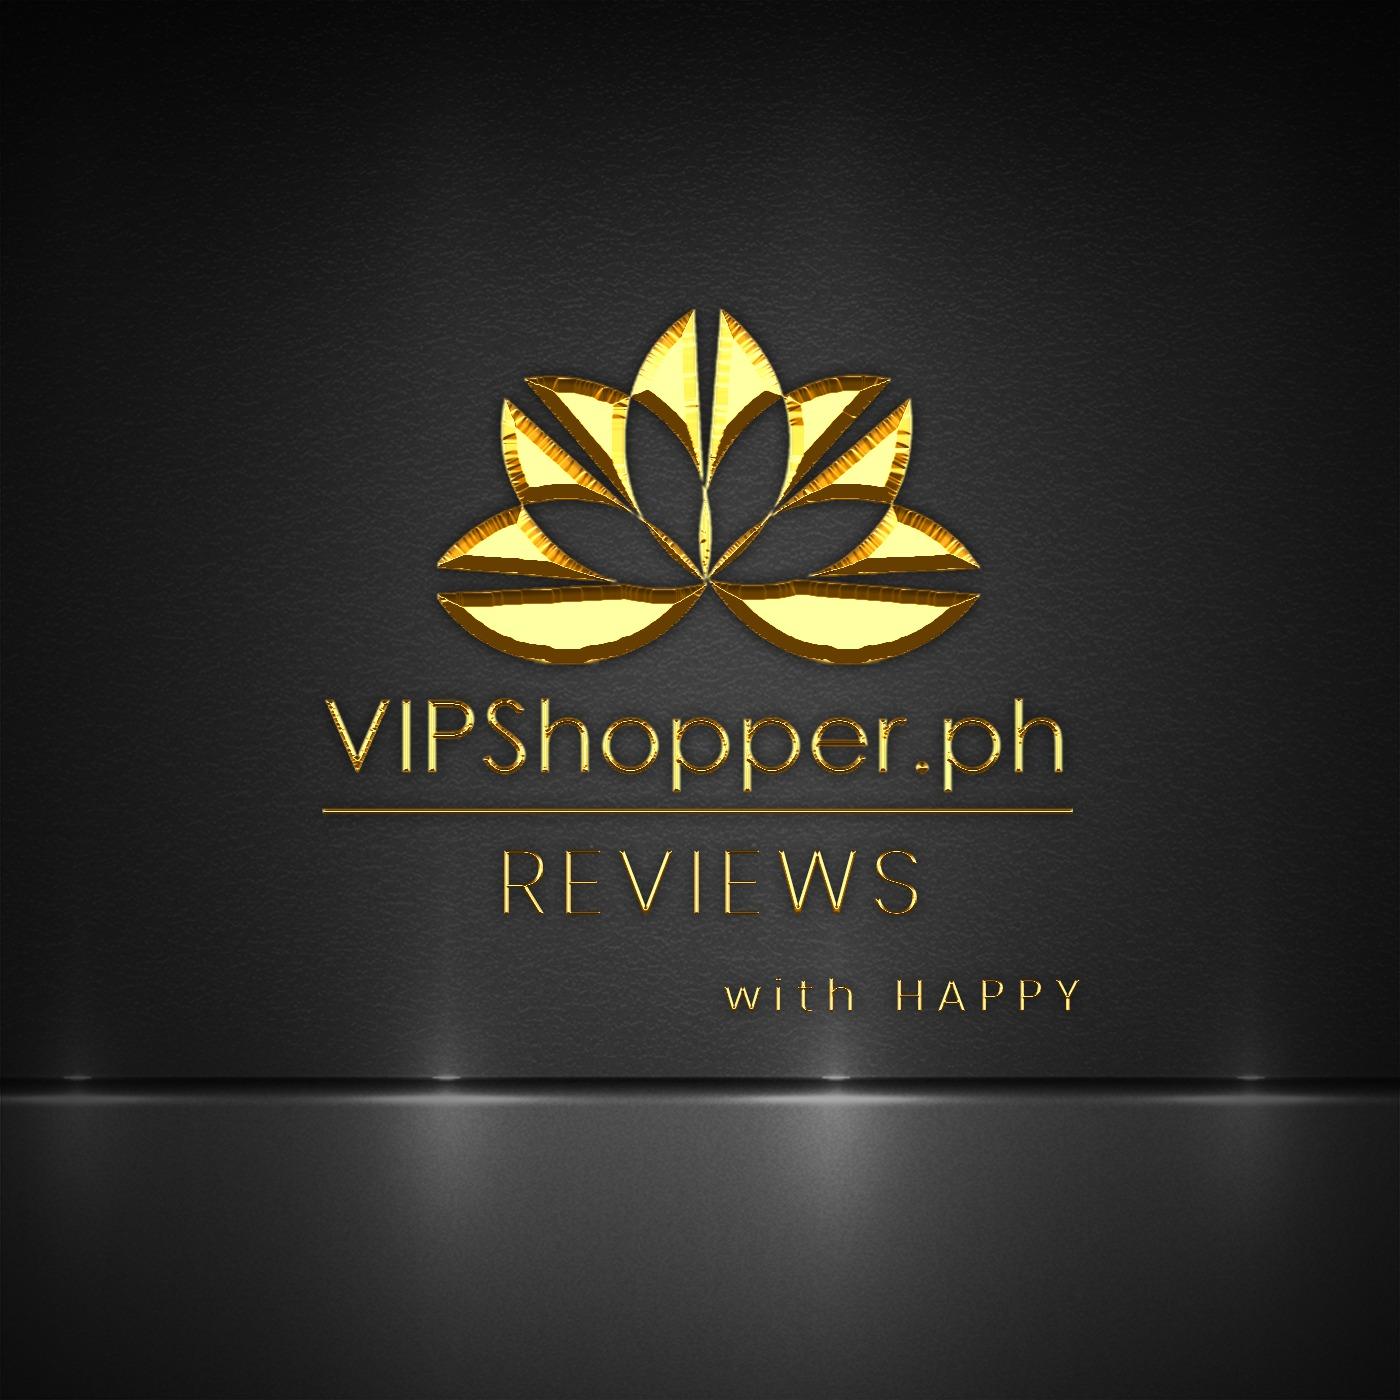 VIPShopper.ph Reviews with Happy